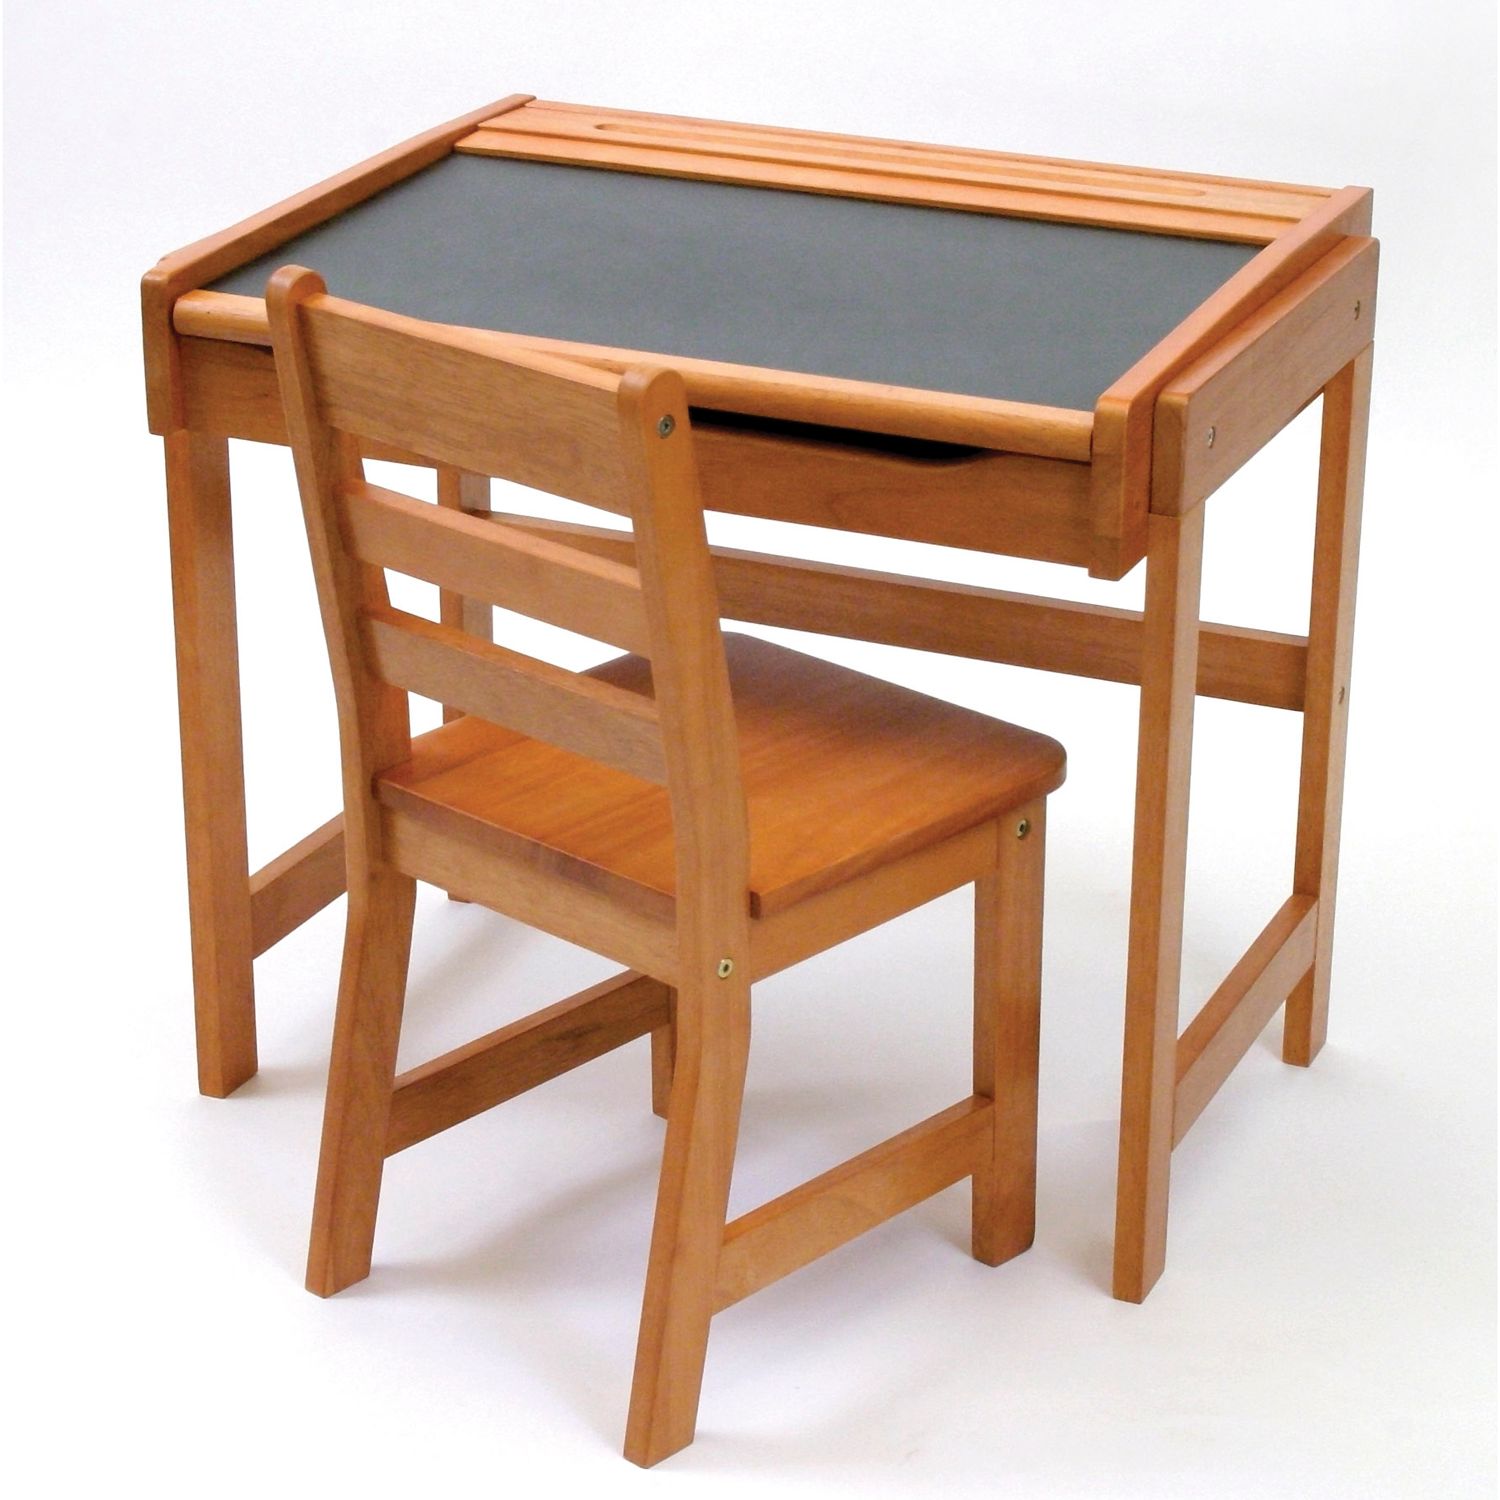 lipper childrens table and chairs